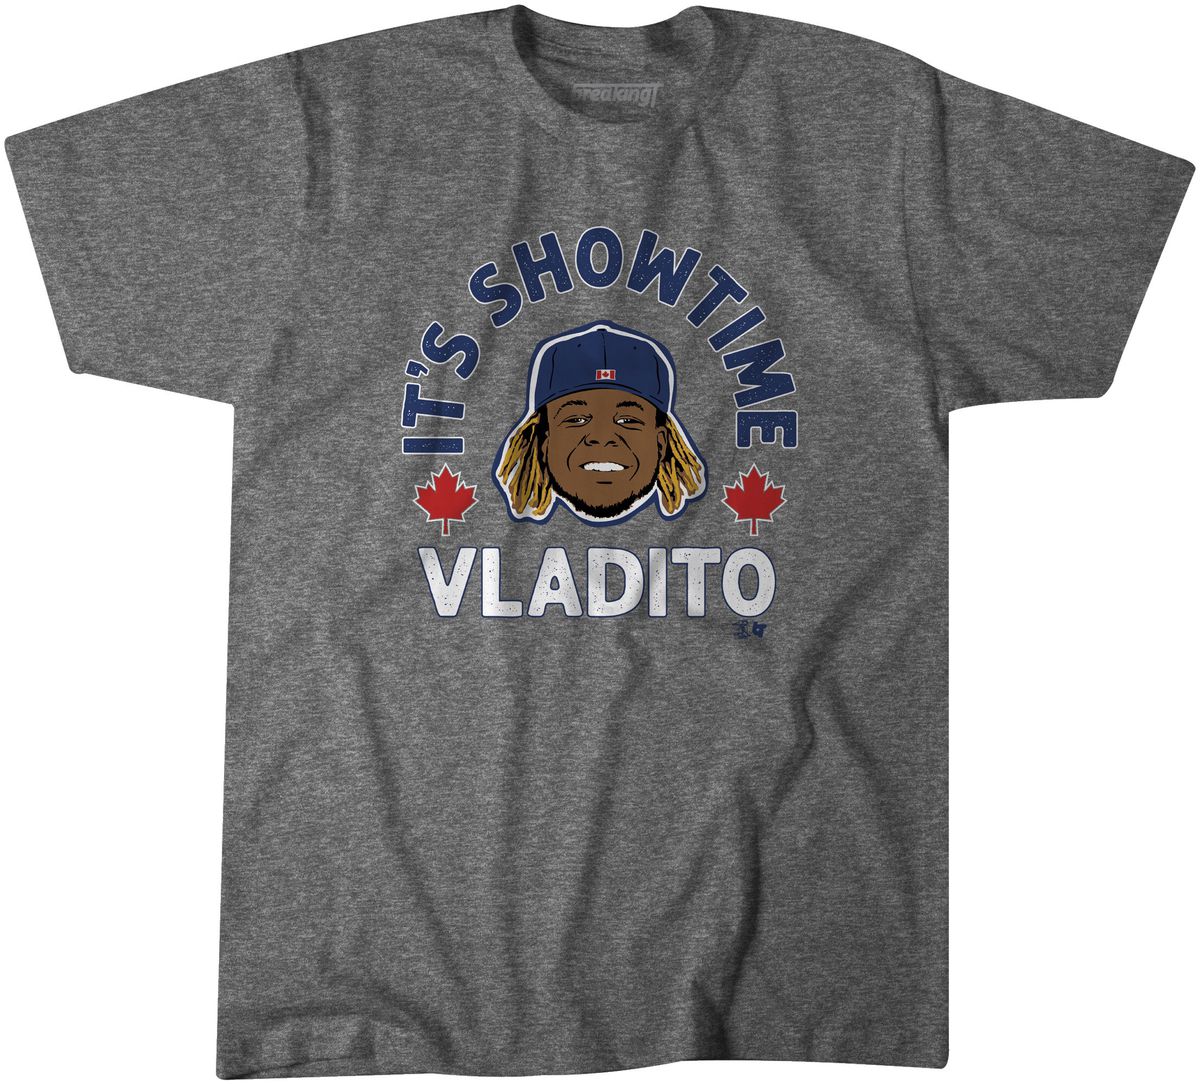 An illustration of Blue Jays’ player Vladimir Guerrero’s face and head, wearing a blue baseball cap with a flag of Canada on it, is surrounded by the words “It’s Showtime, Vladito” in blue and white text as well as two red maple leaves, all on a grey t-sh